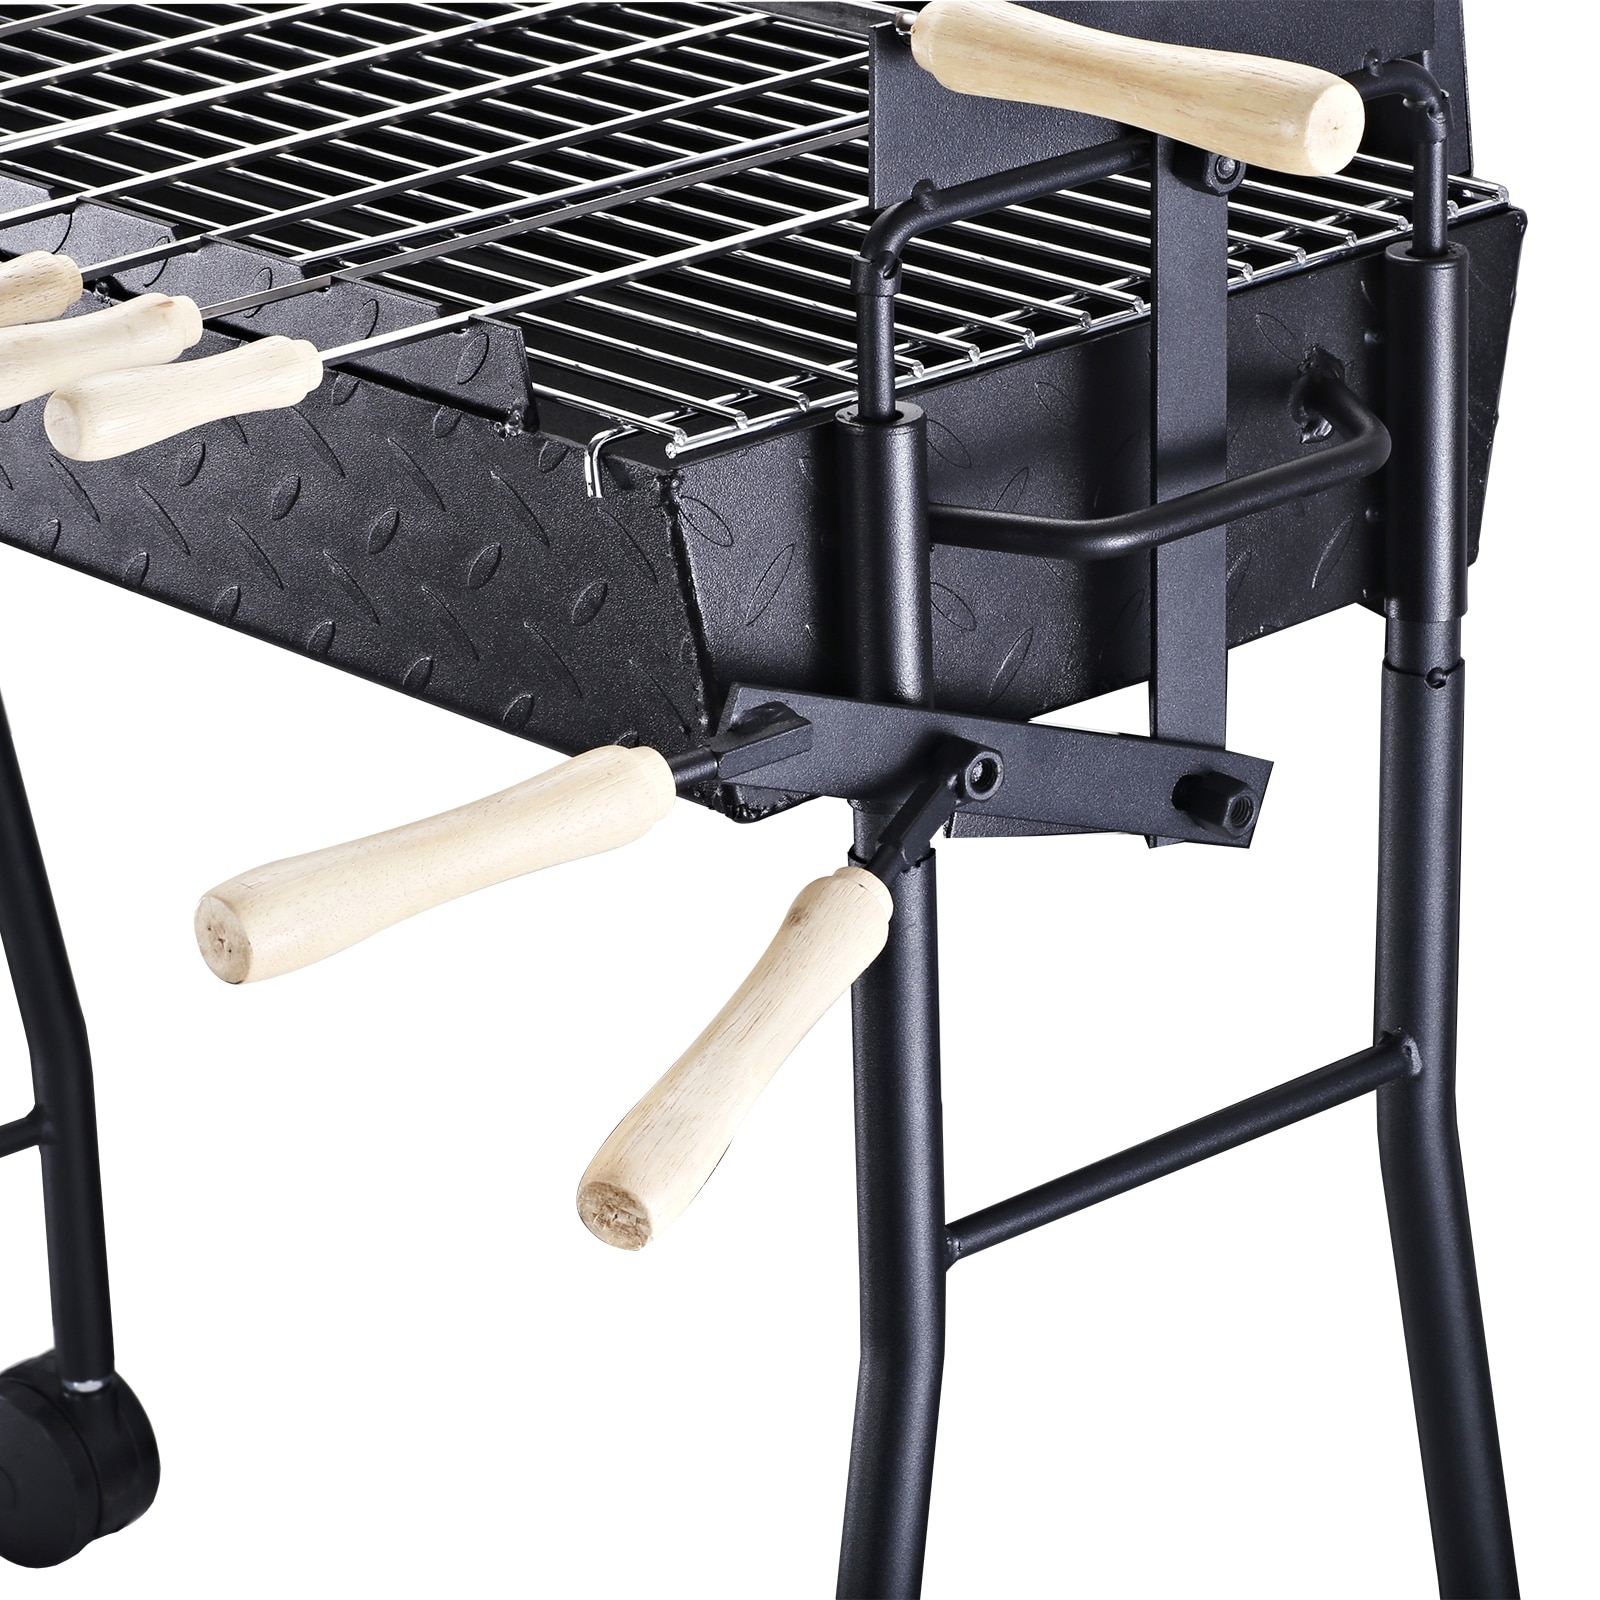 https://ak1.ostkcdn.com/images/products/is/images/direct/dbd99d43a7be5a2cfbb5c60e88a5113f746c792c/Outsunny-2-in-1-Portable-Rotisserie-Charcoal-BBQ-Grill-with-Large-Small-Skewers-Included-and-4-Wheels-for-Portability.jpg